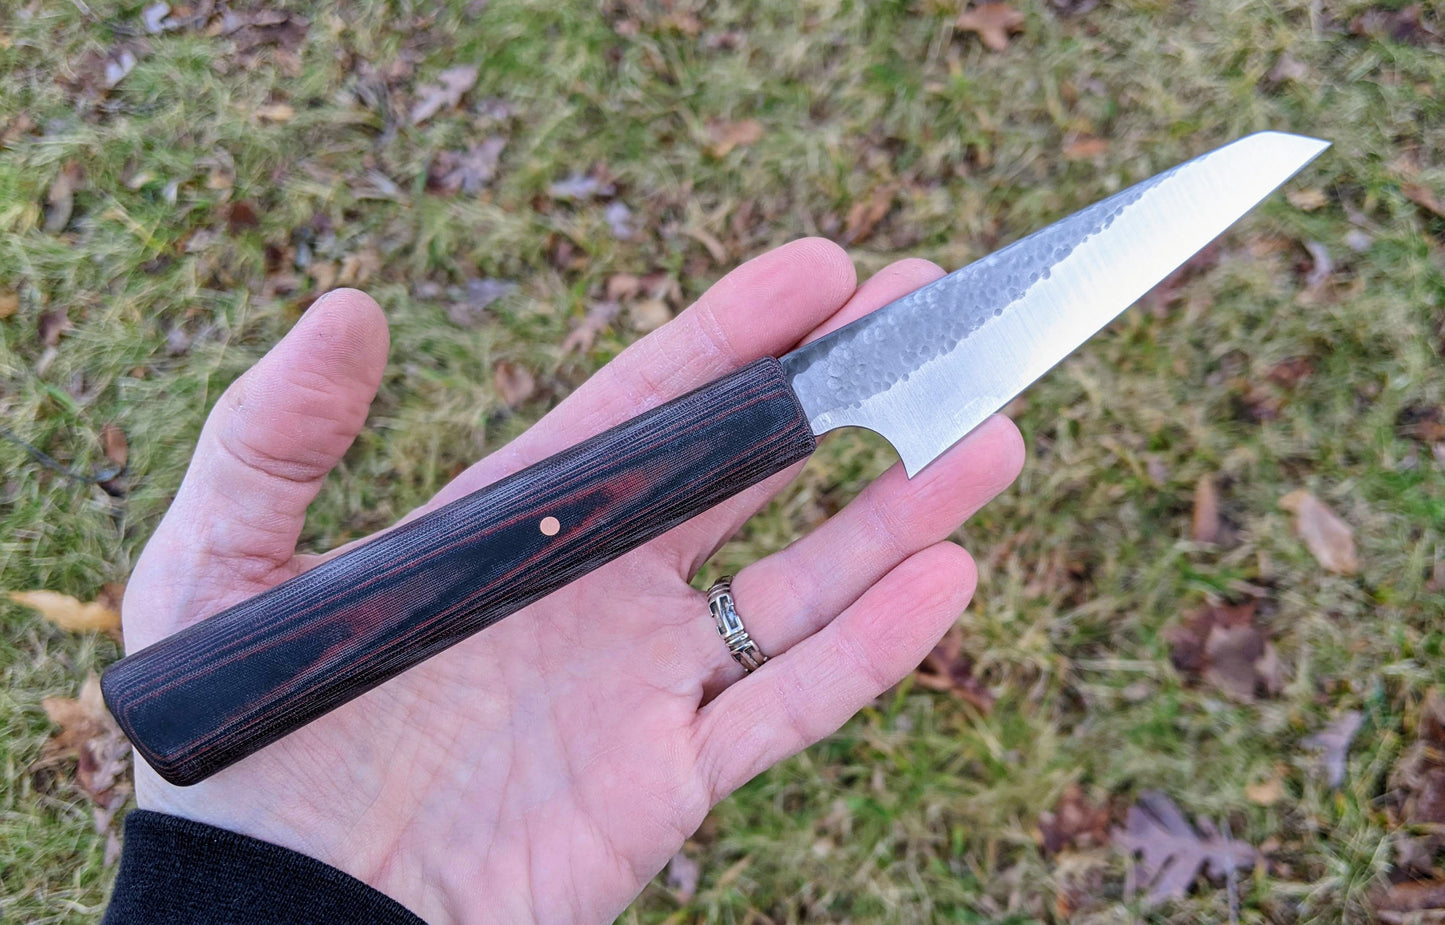 Petty with red and black handle